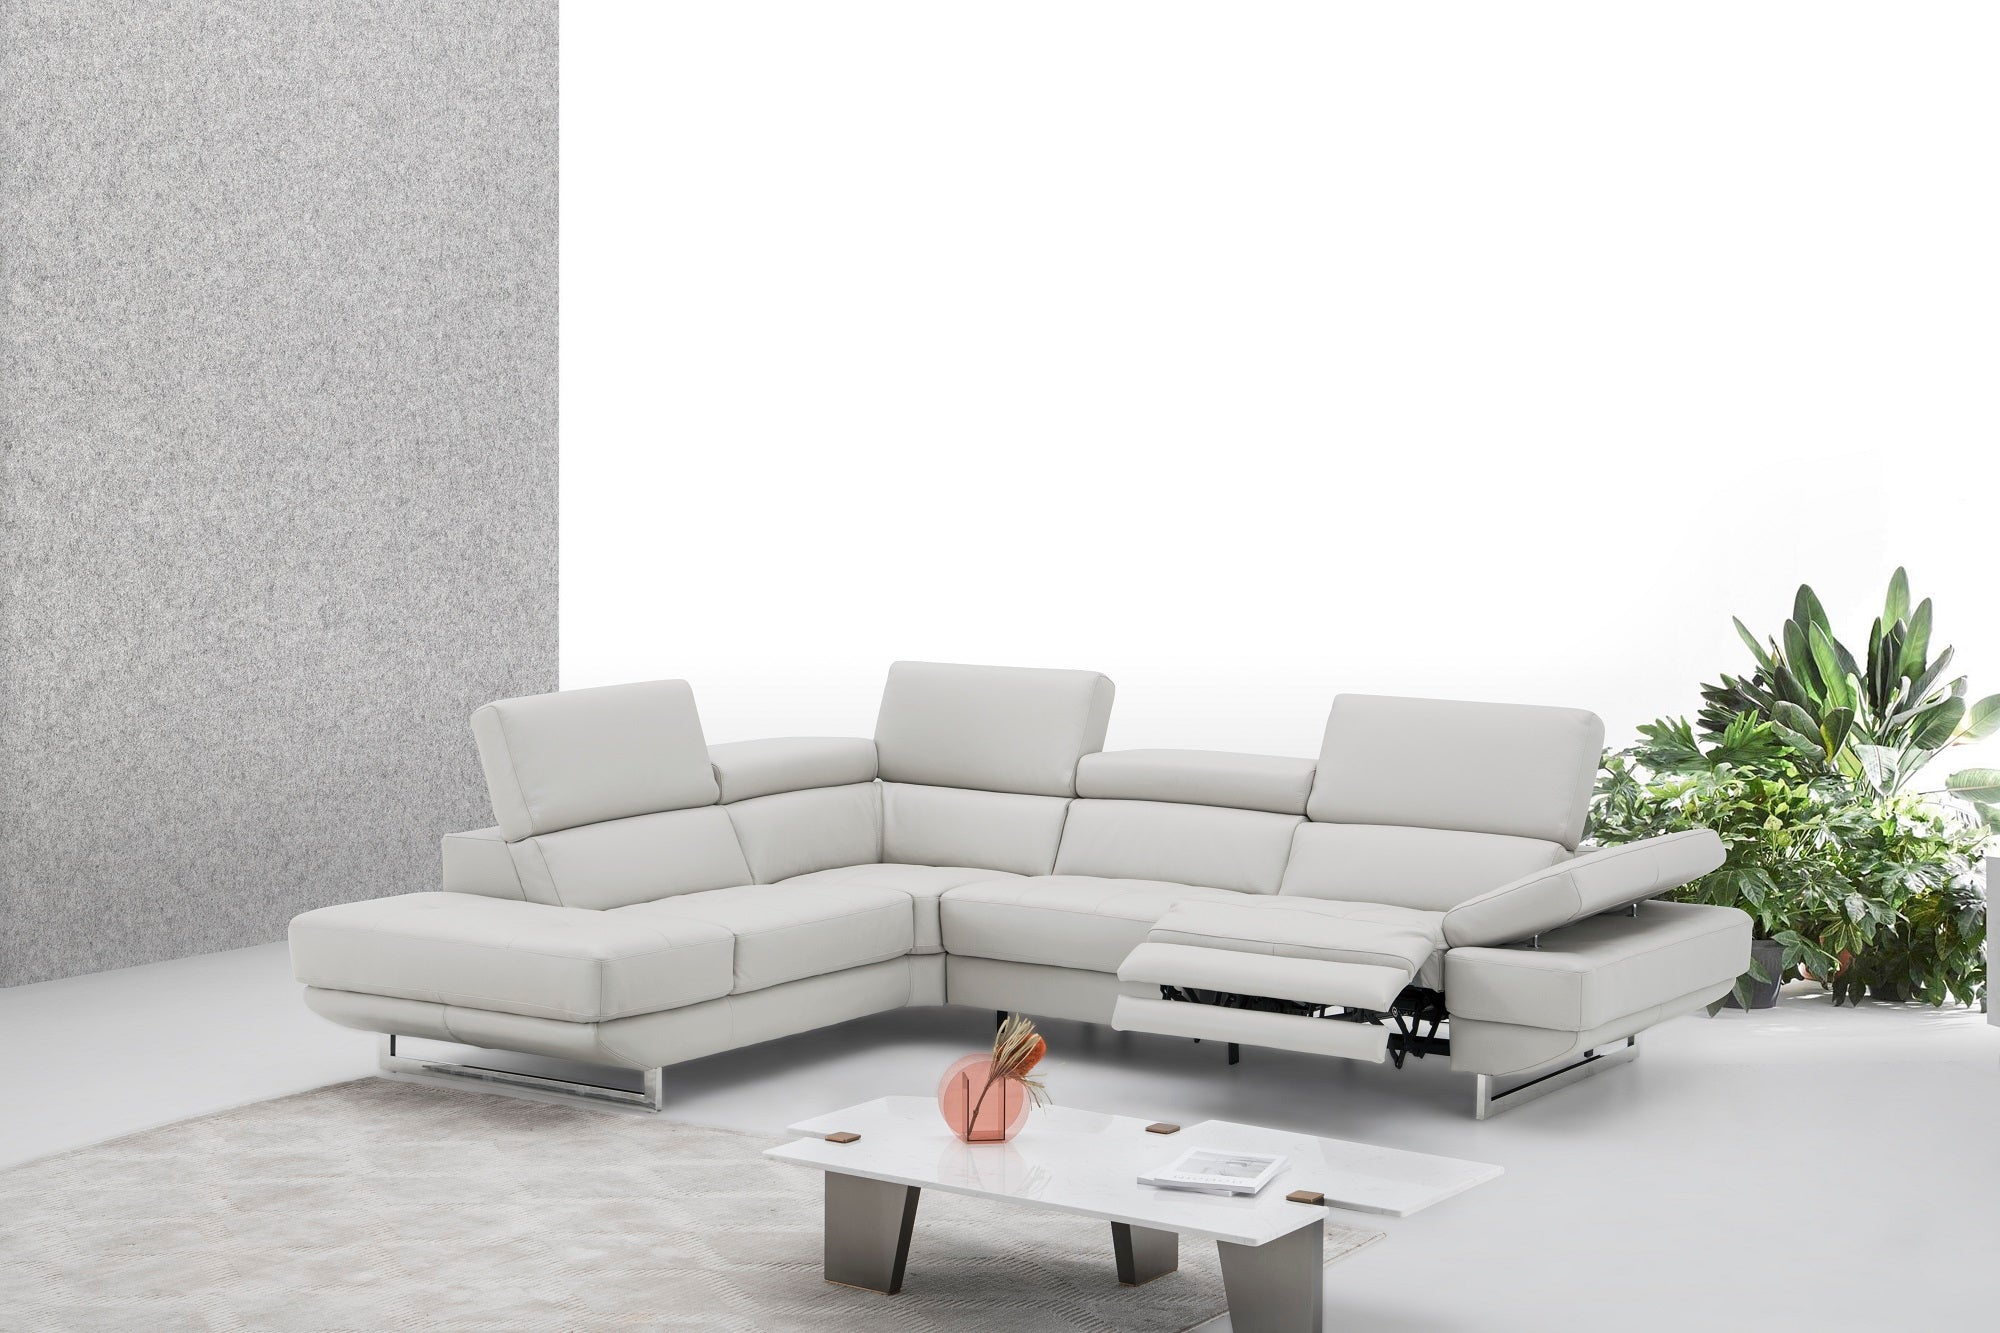 Annalaise Italian Leather Sectional in Silver Grey